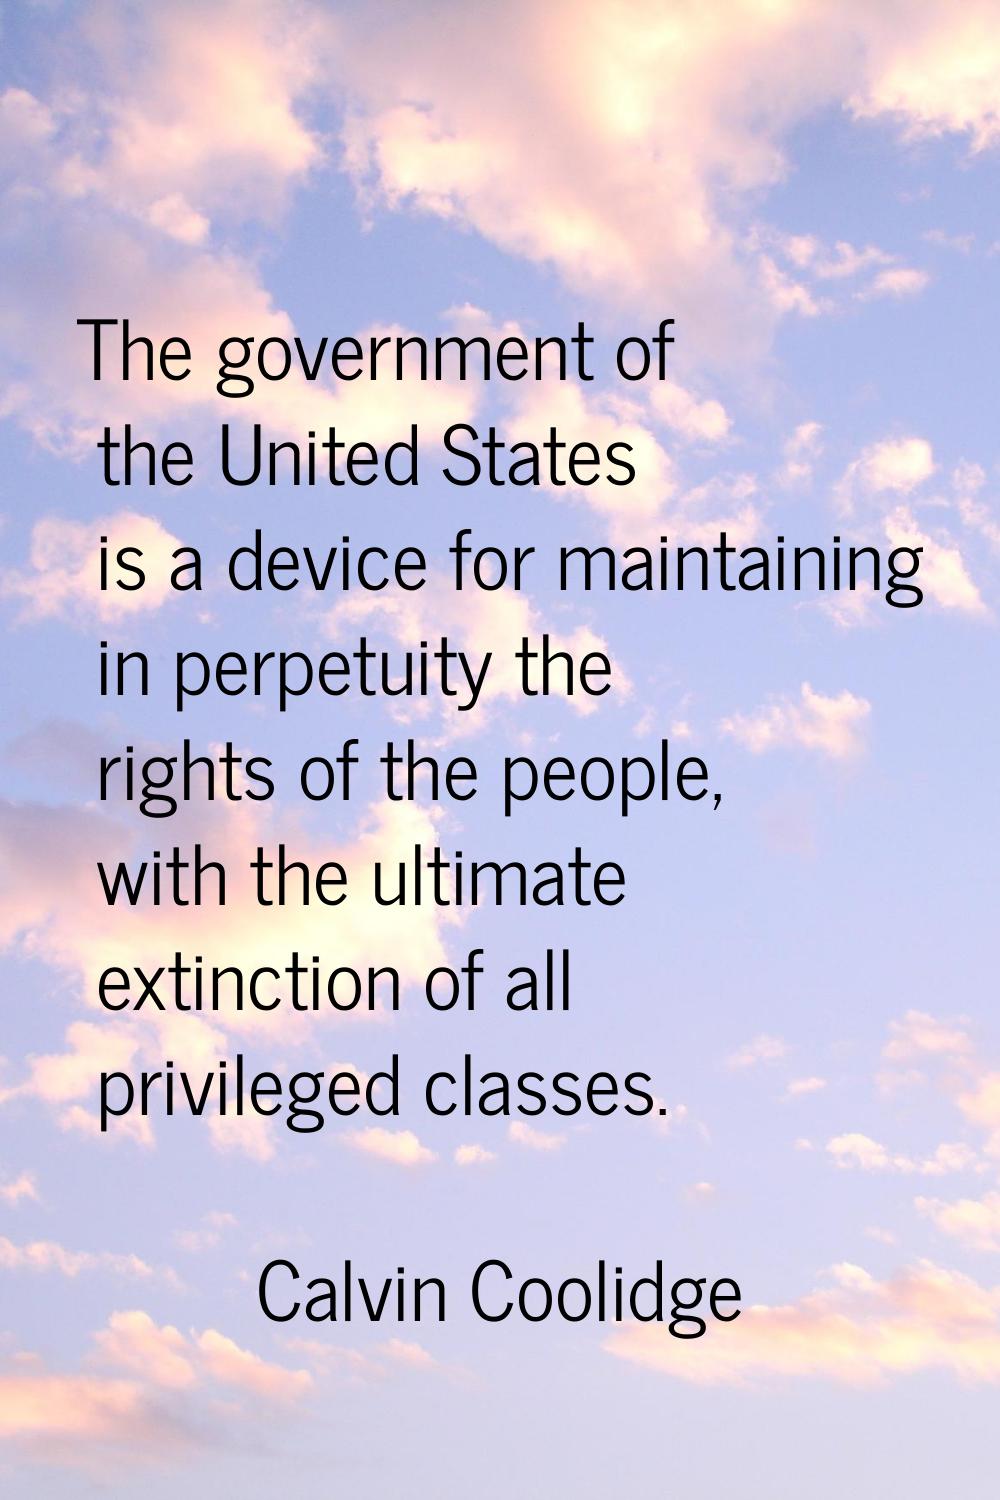 The government of the United States is a device for maintaining in perpetuity the rights of the peo